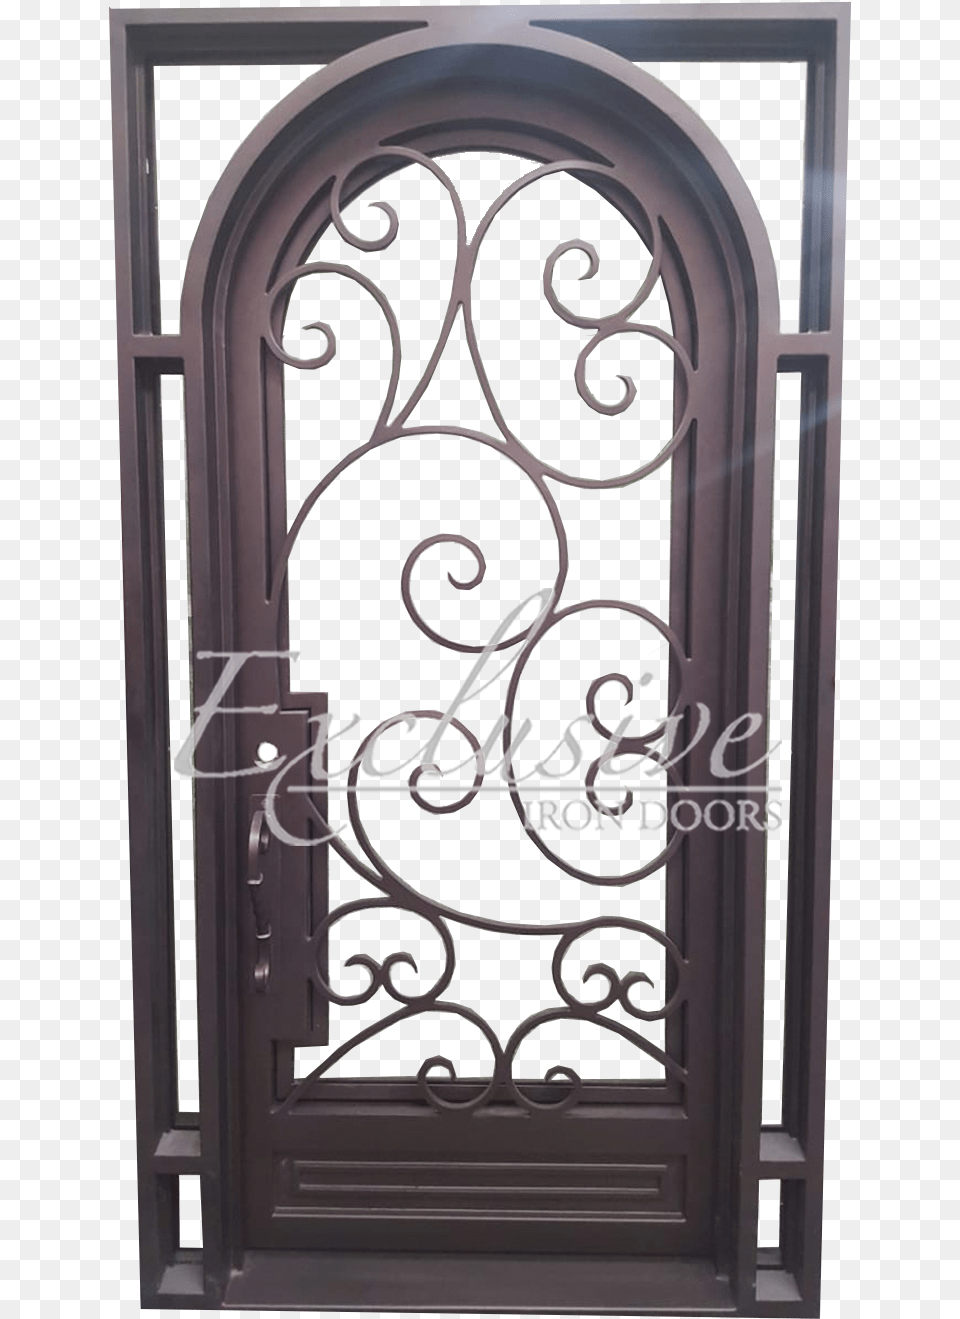 Heather Round Single Iron Door Home Door, Gate, Arch, Architecture, Building Free Transparent Png